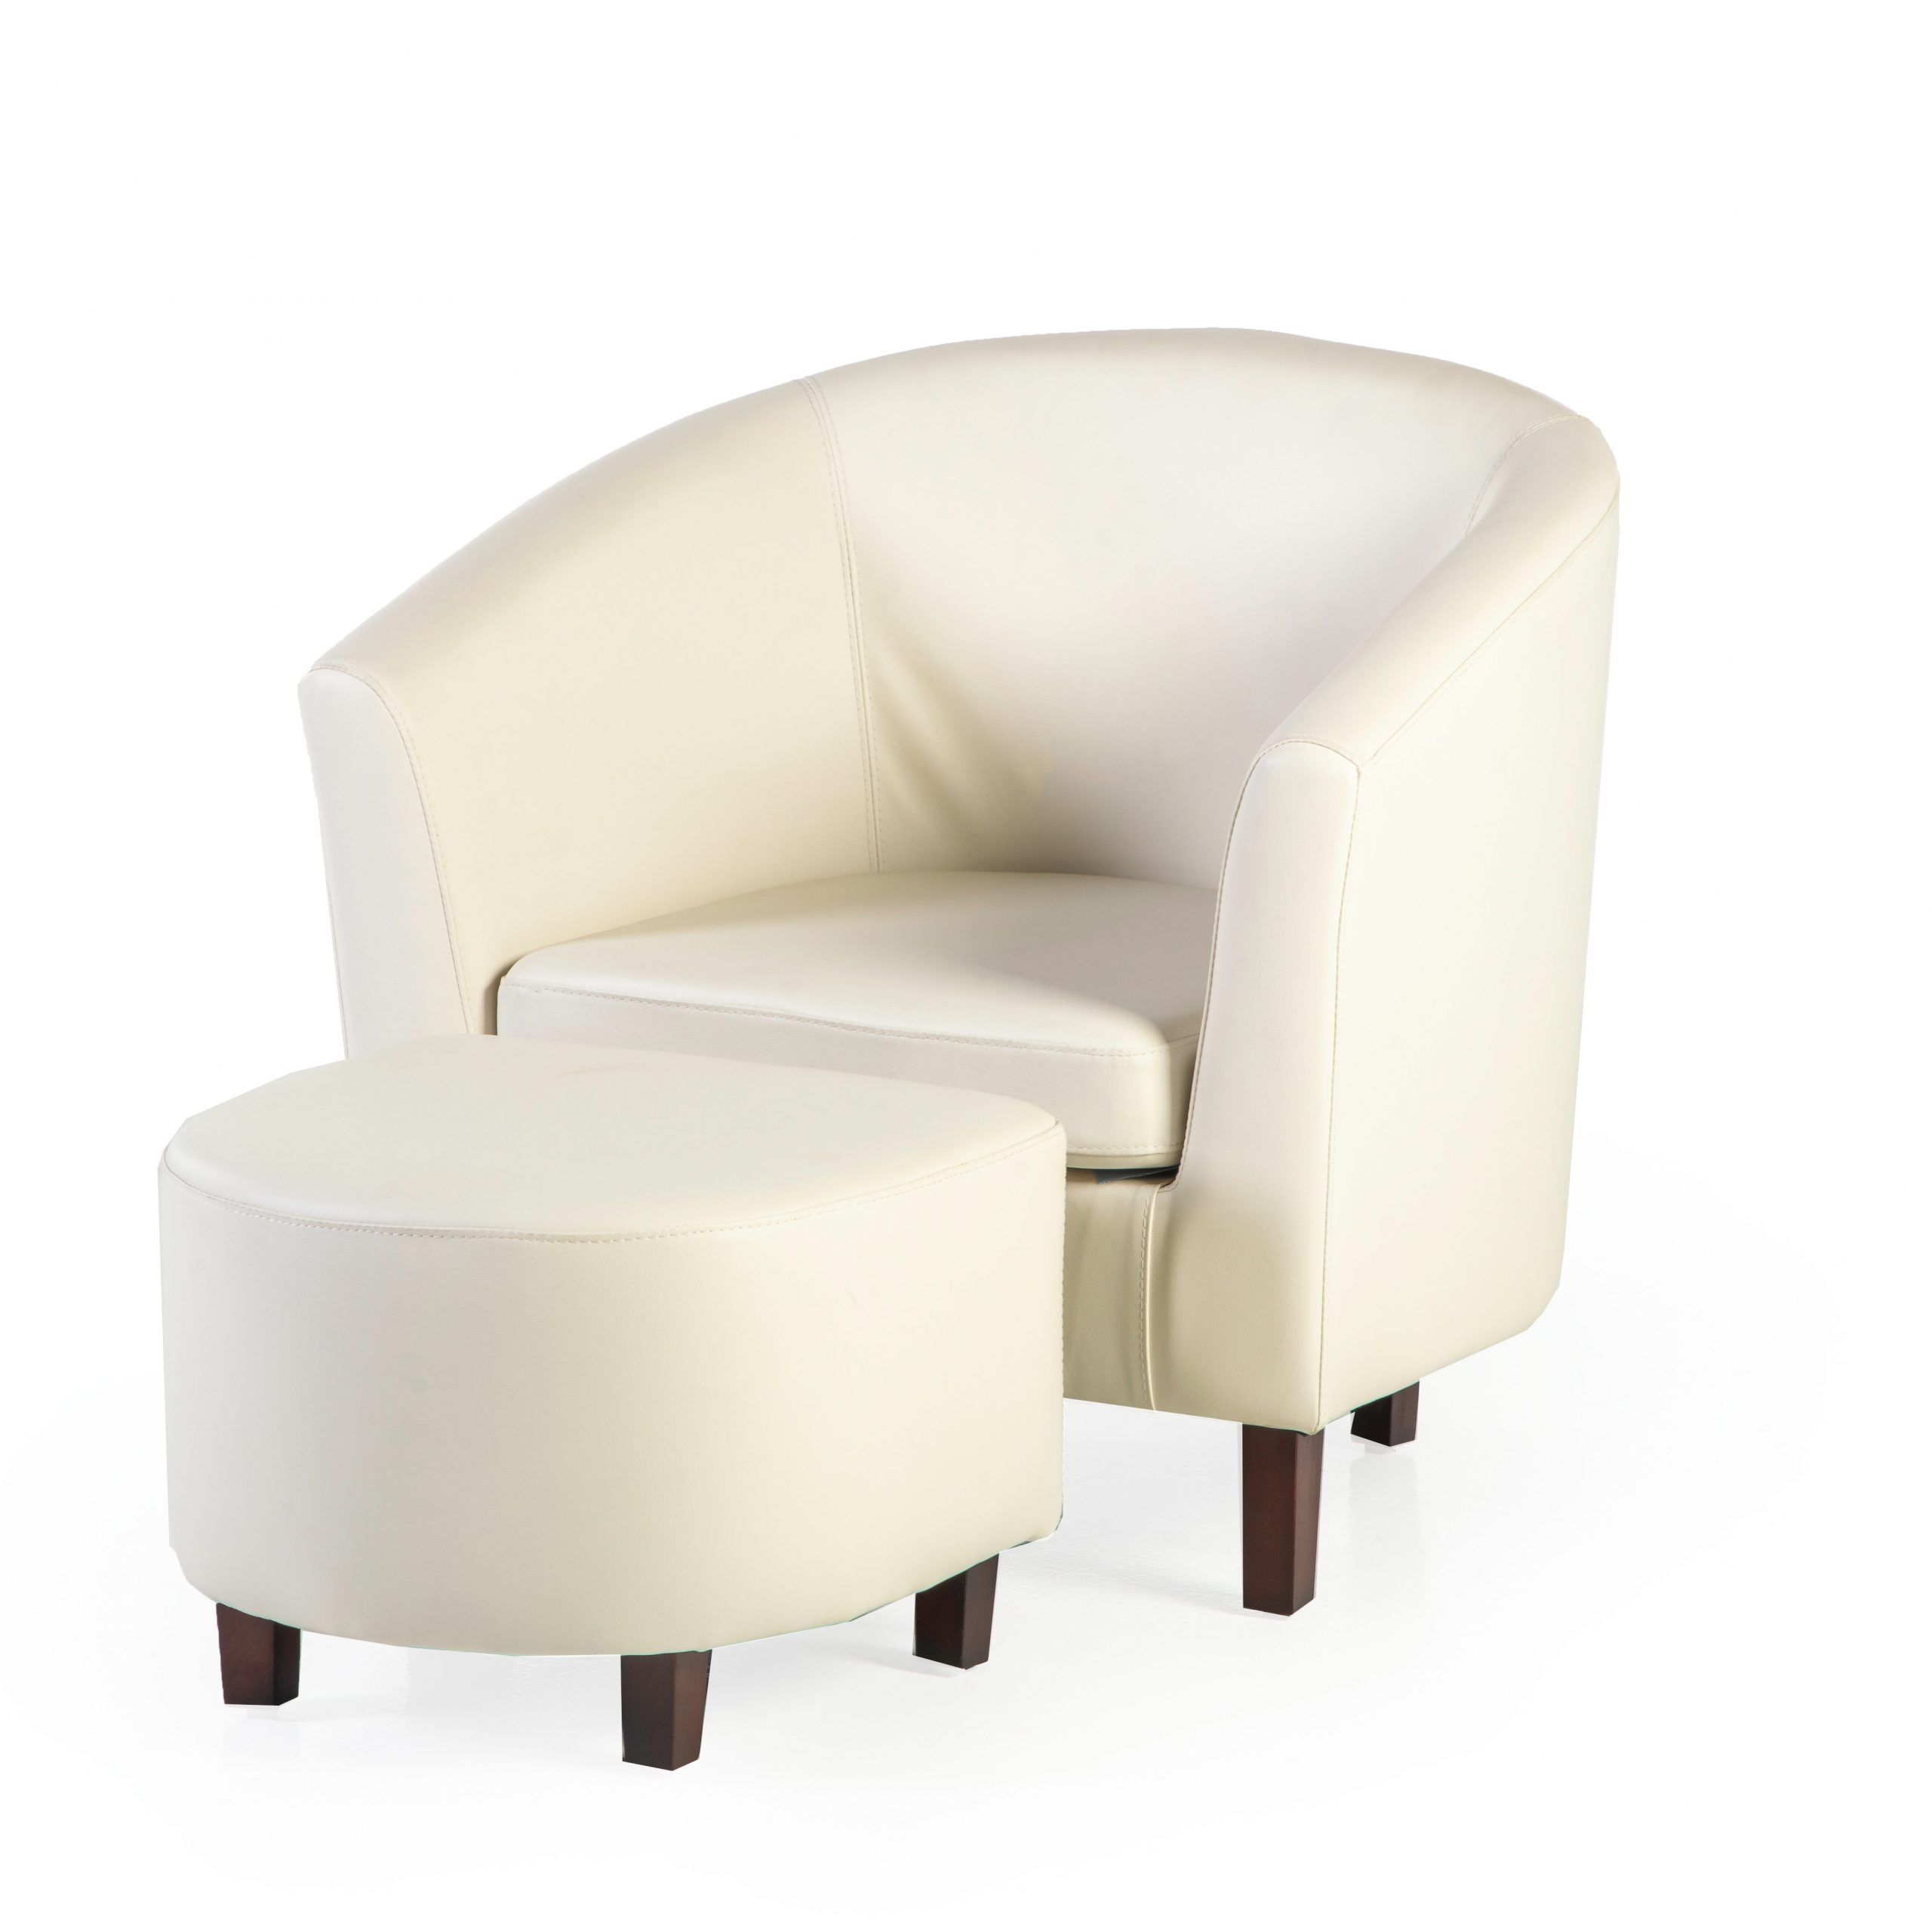 Ebern Designs 30" W Faux Leather Barrel Chair And Ottoman With Faux Leather Barrel Chair And Ottoman Sets (View 6 of 15)